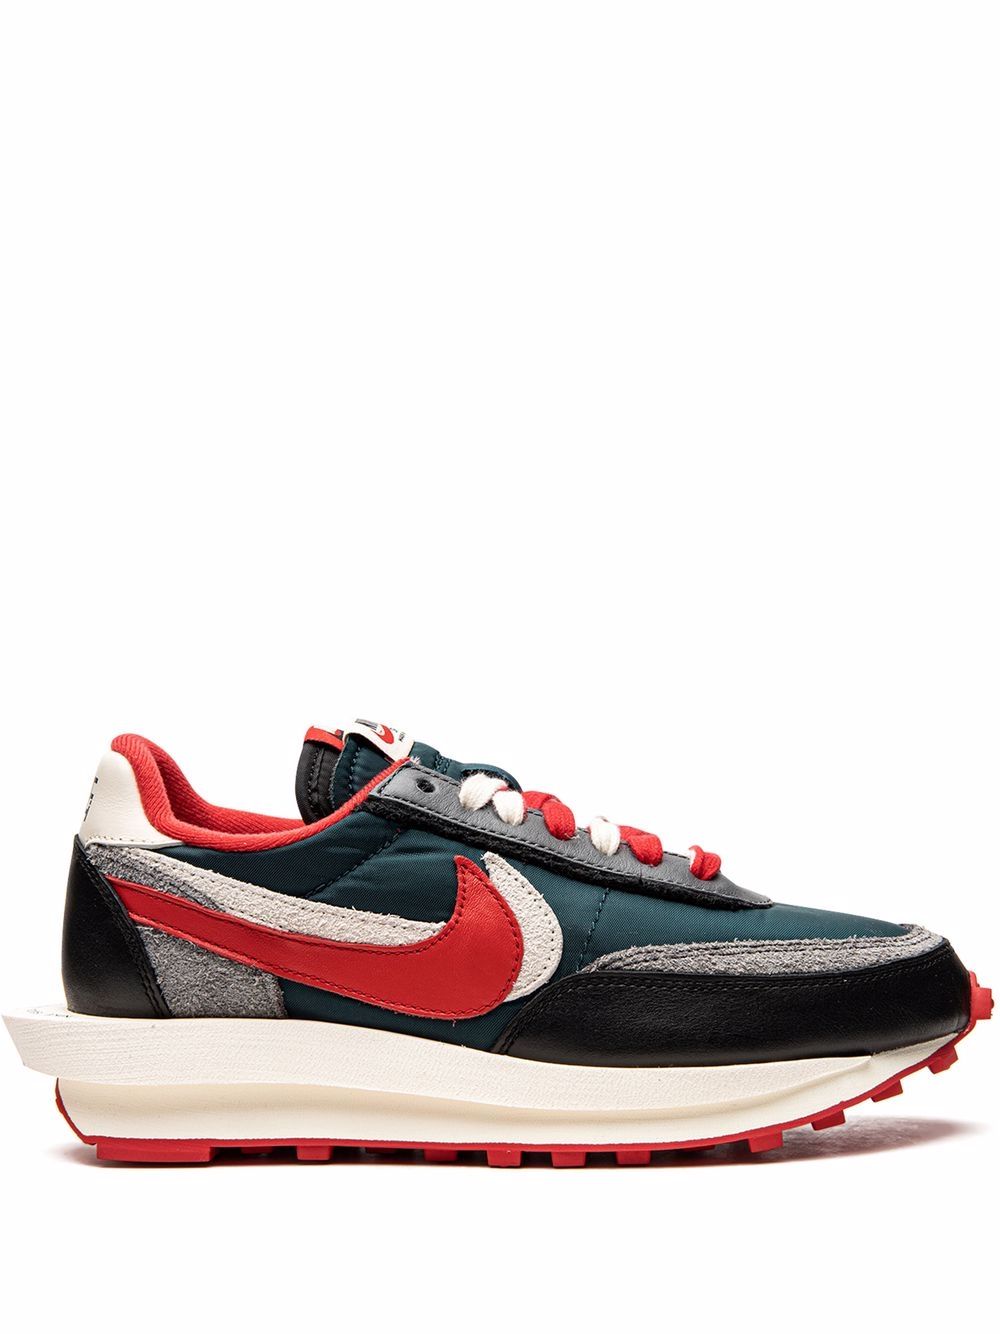 Nike x Undercover x sacai x LDWaffle "Midnight Spruce University Red" sneakers - Blue von Nike